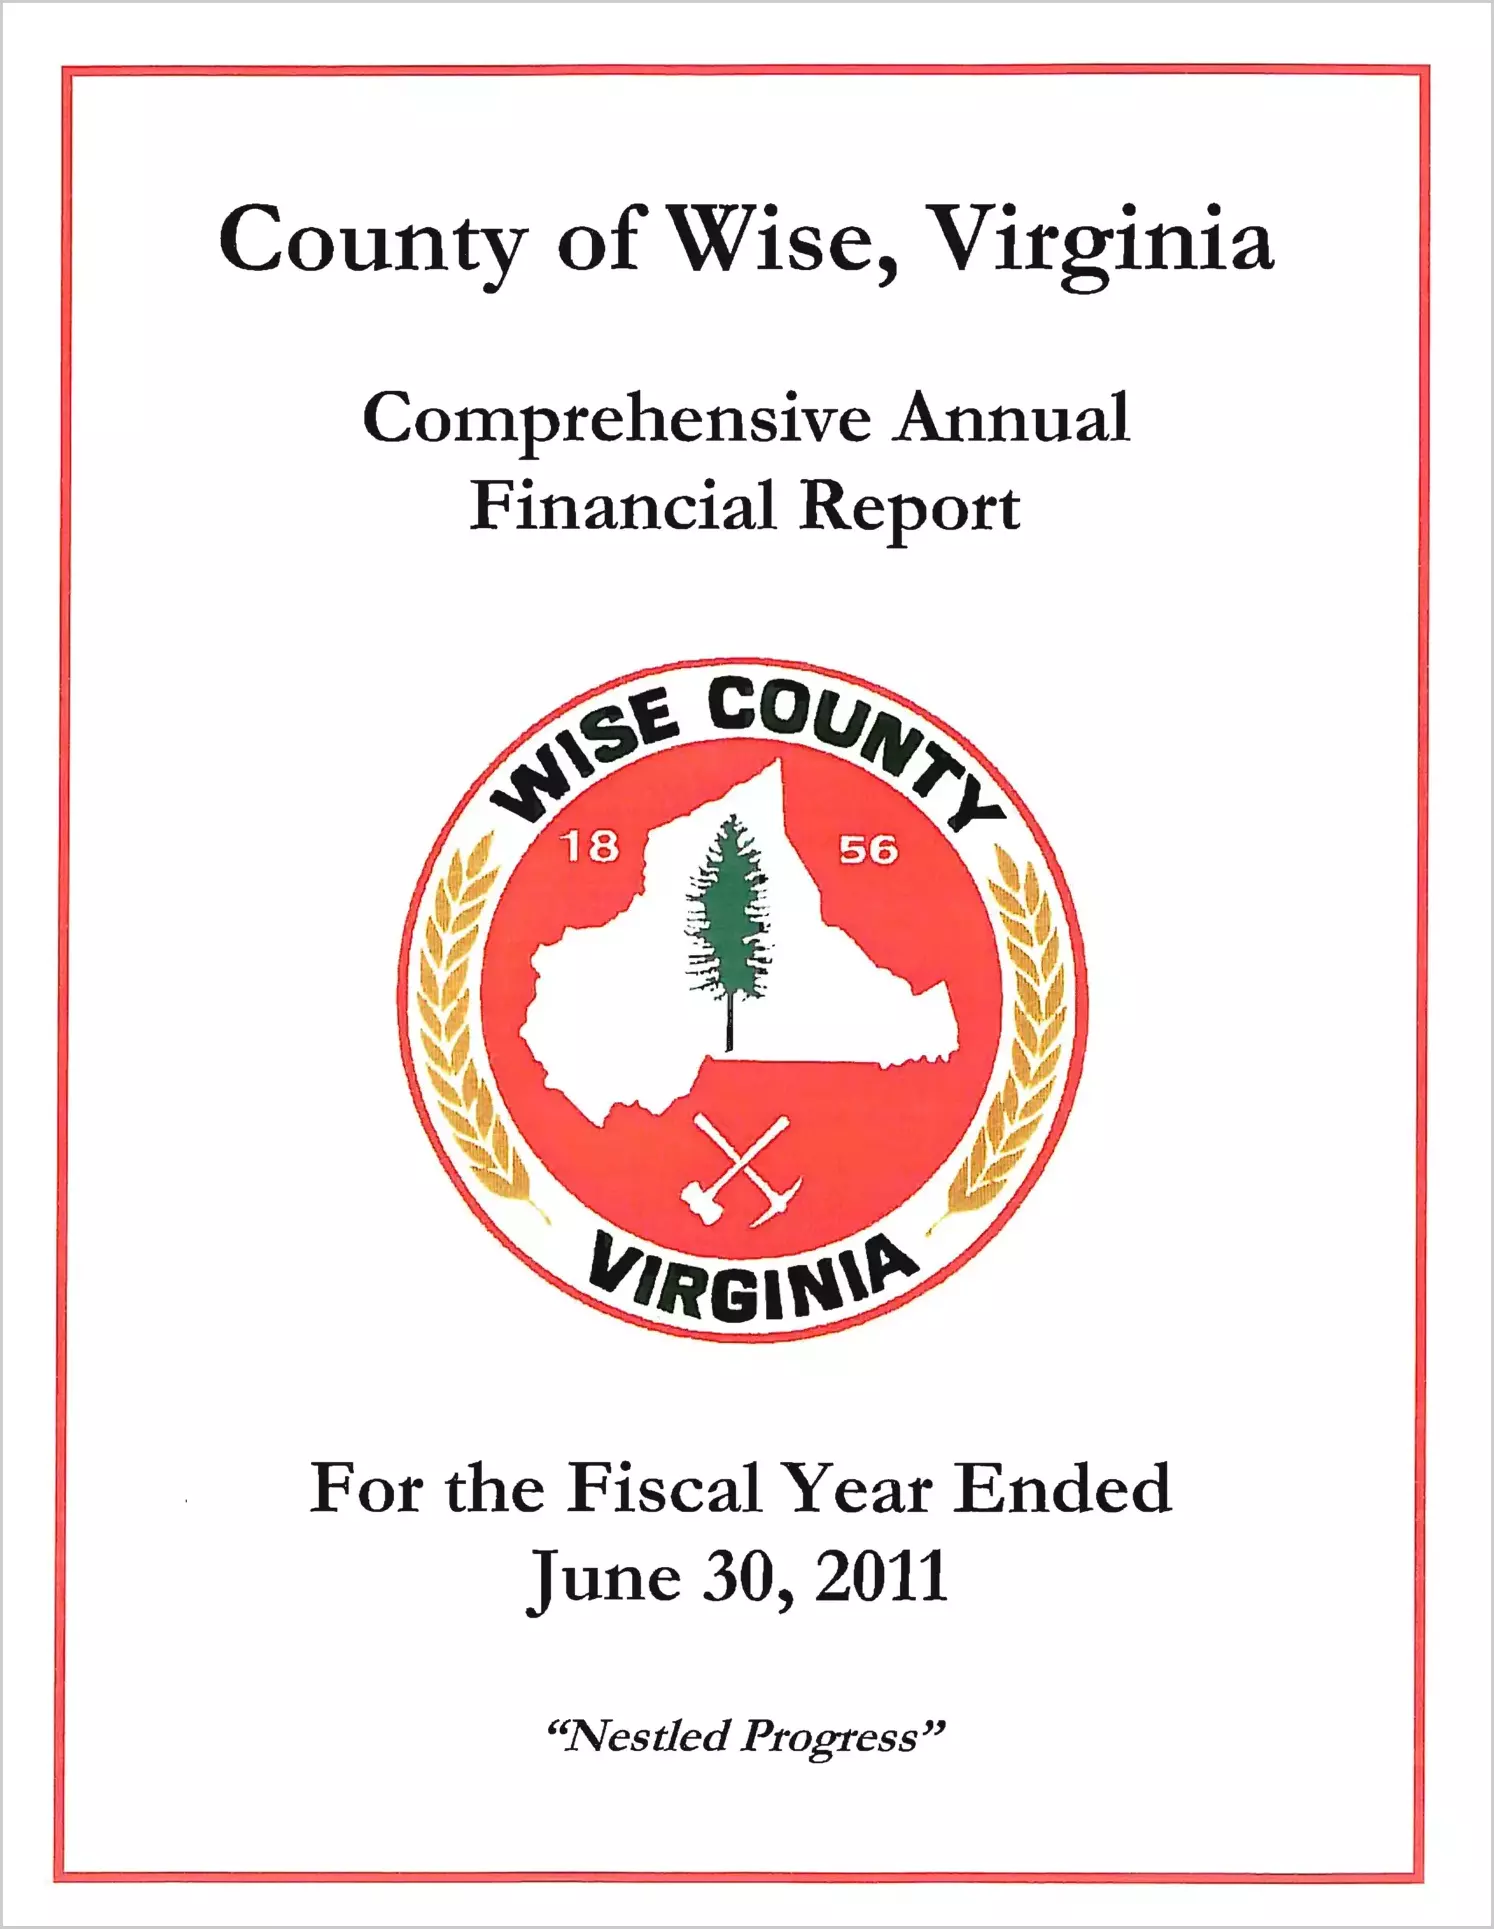 2011 Annual Financial Report for County of Wise